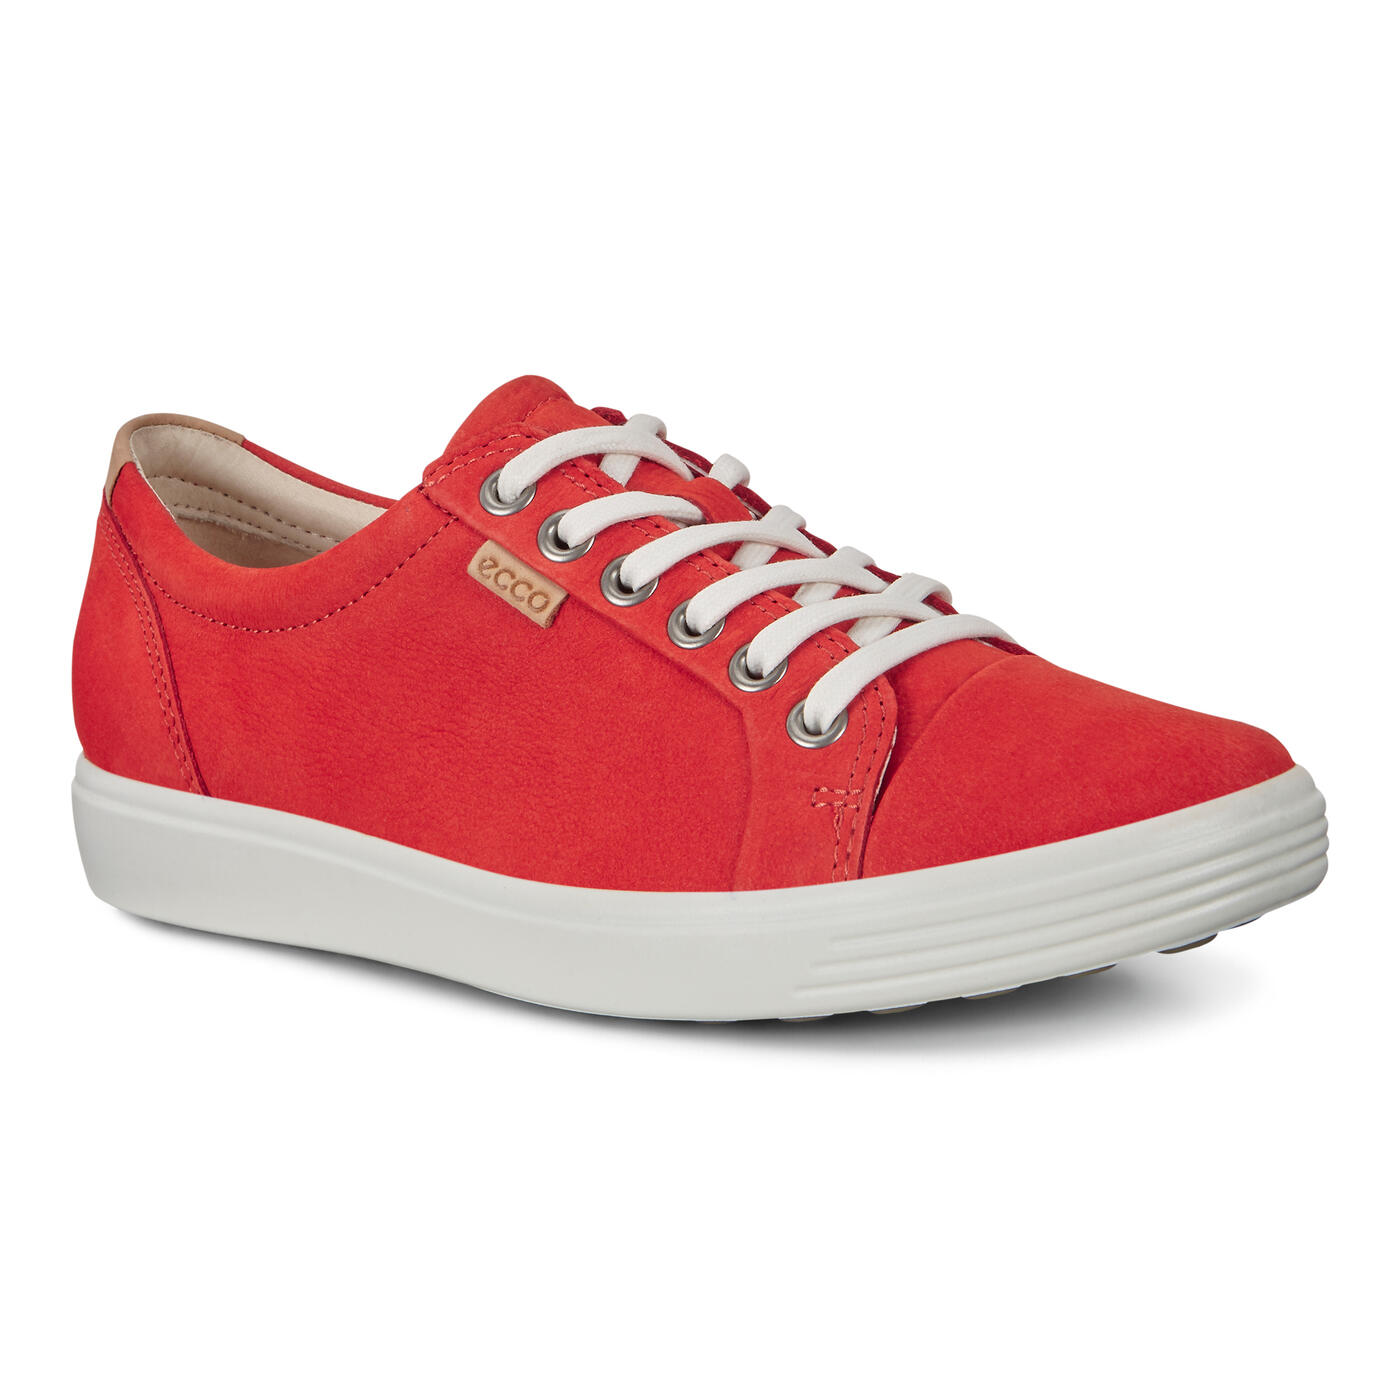 Women's Soft 7 Sneakers | Official Store | ECCO® Shoes